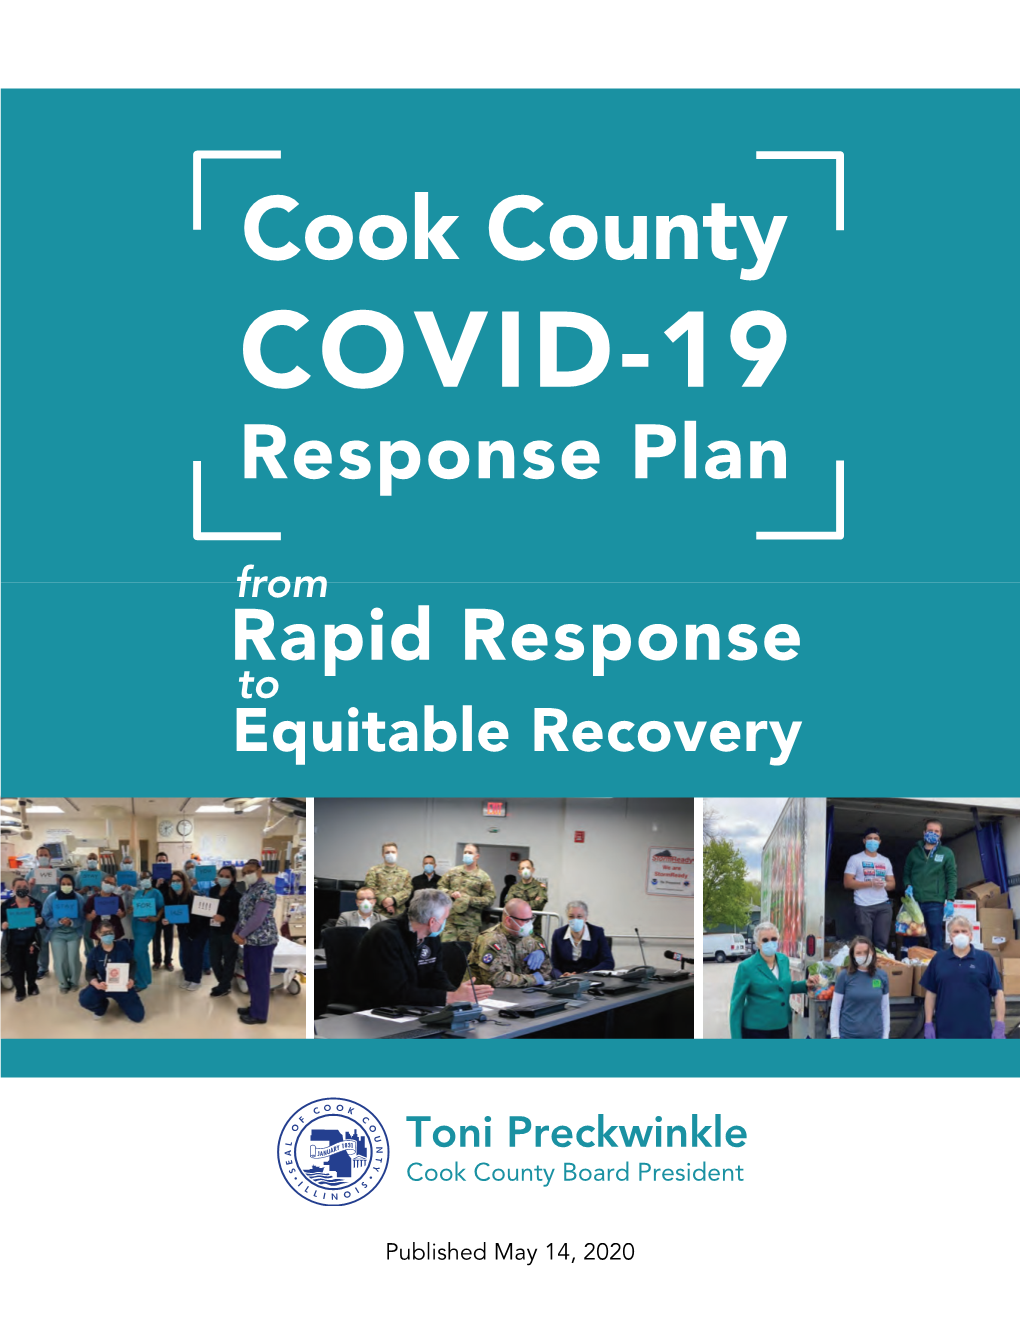 COVID-19 Response Plan from Rapid Response to Equitable Recovery